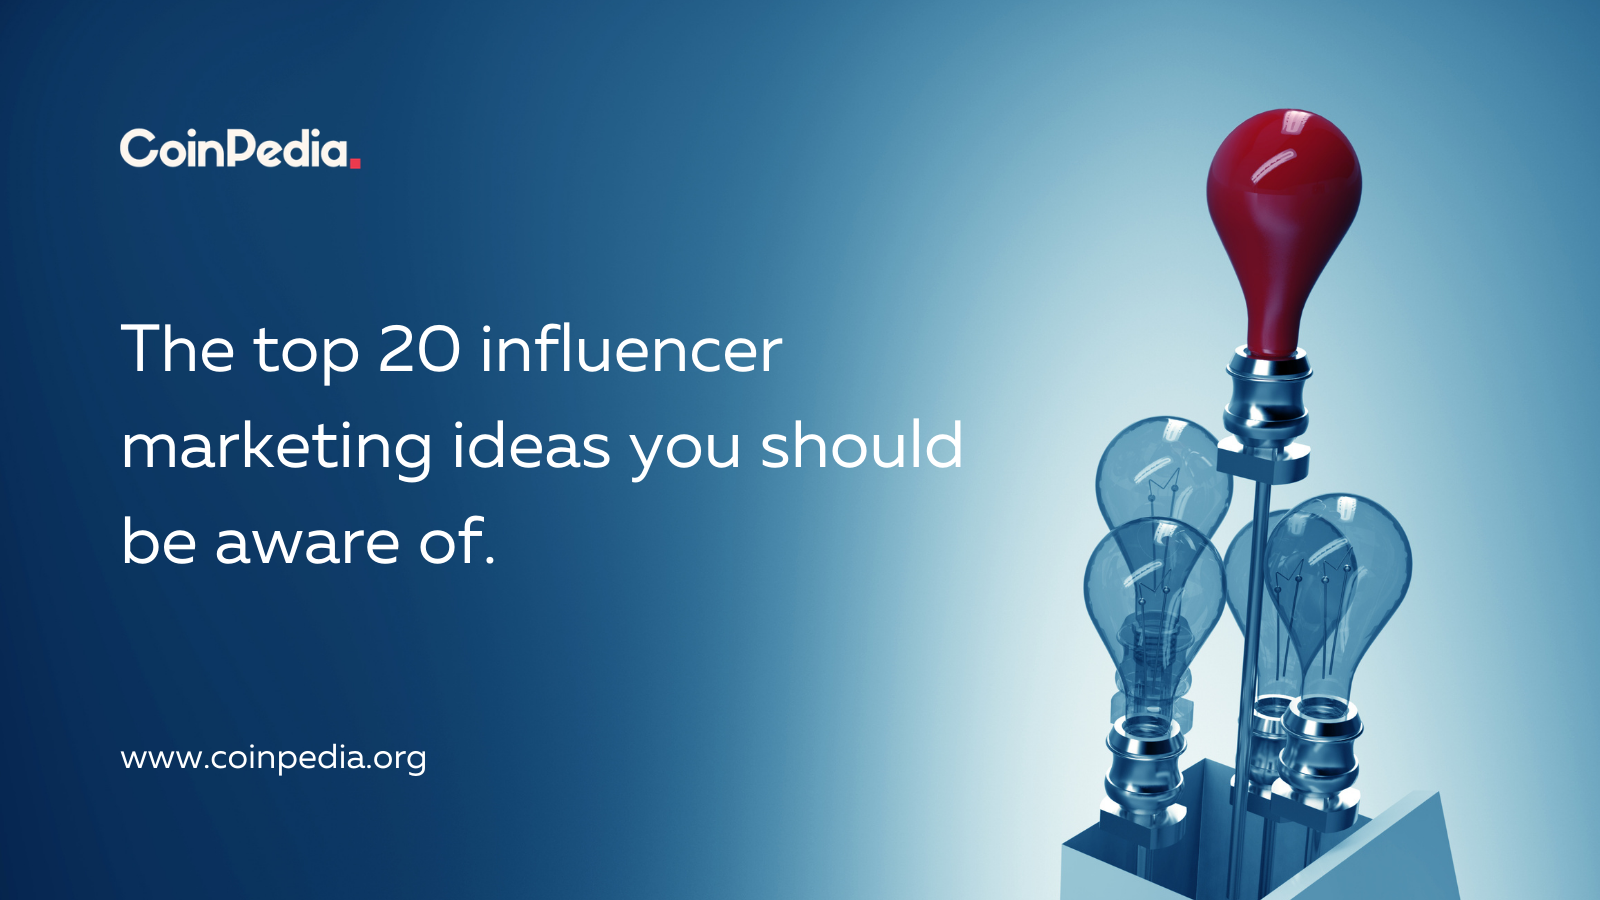 The top 20 influencer marketing ideas you should be aware of